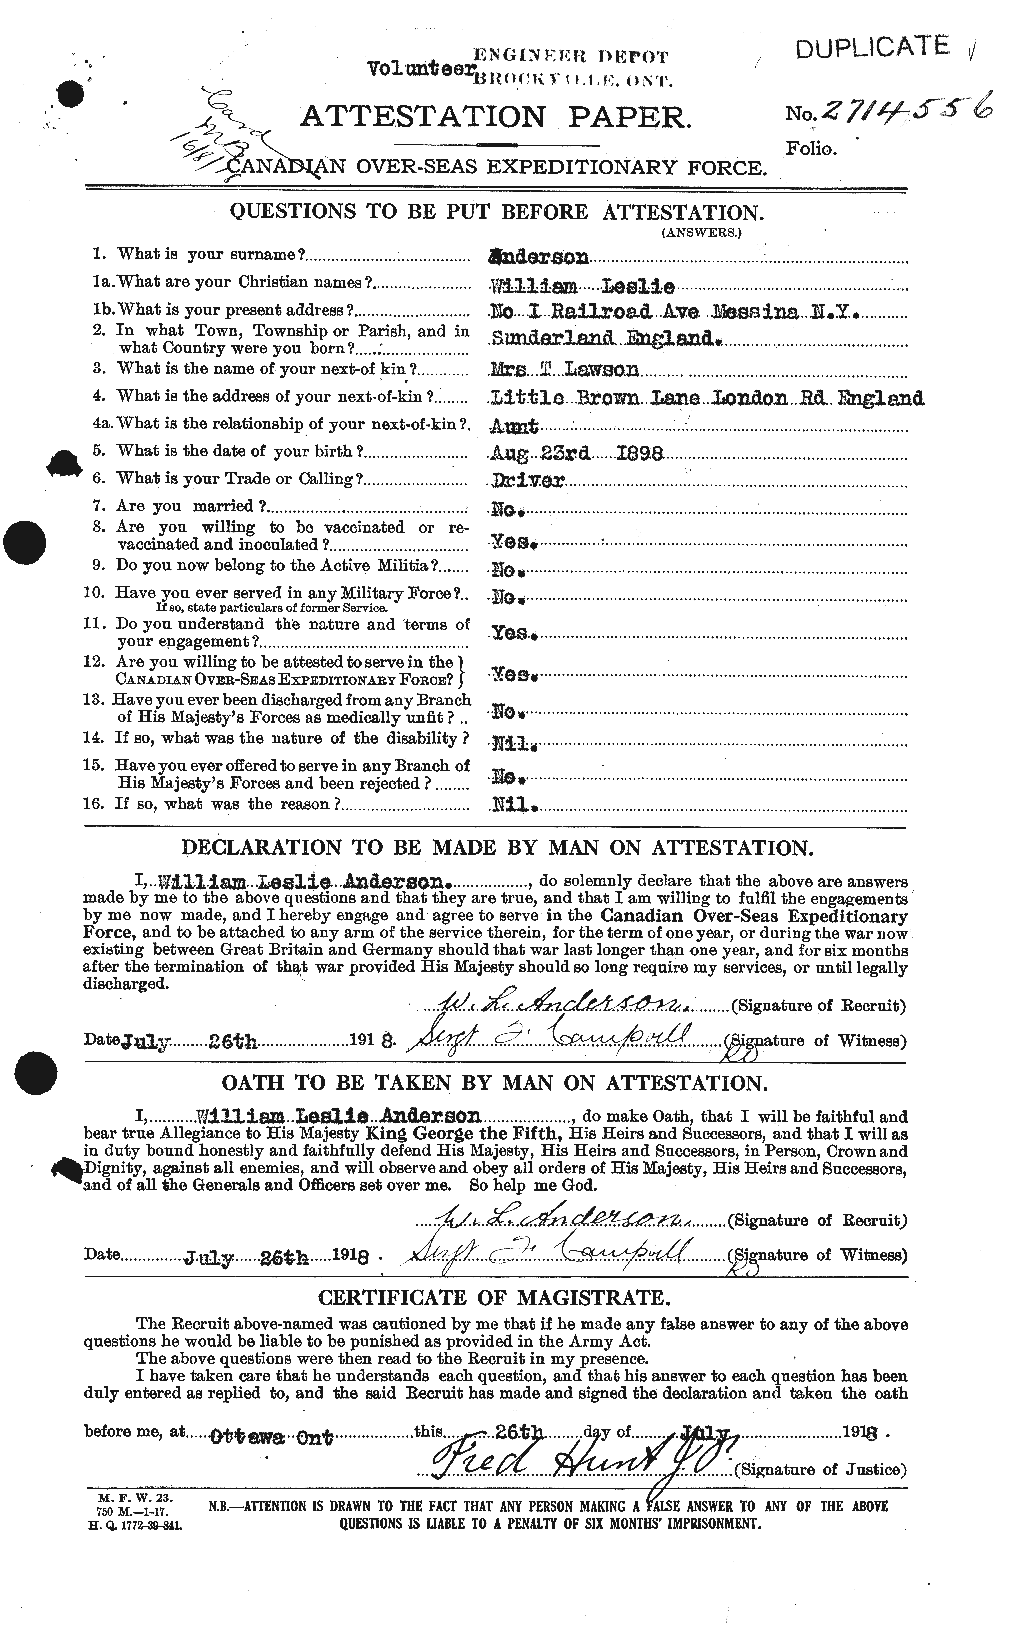 Personnel Records of the First World War - CEF 210687a